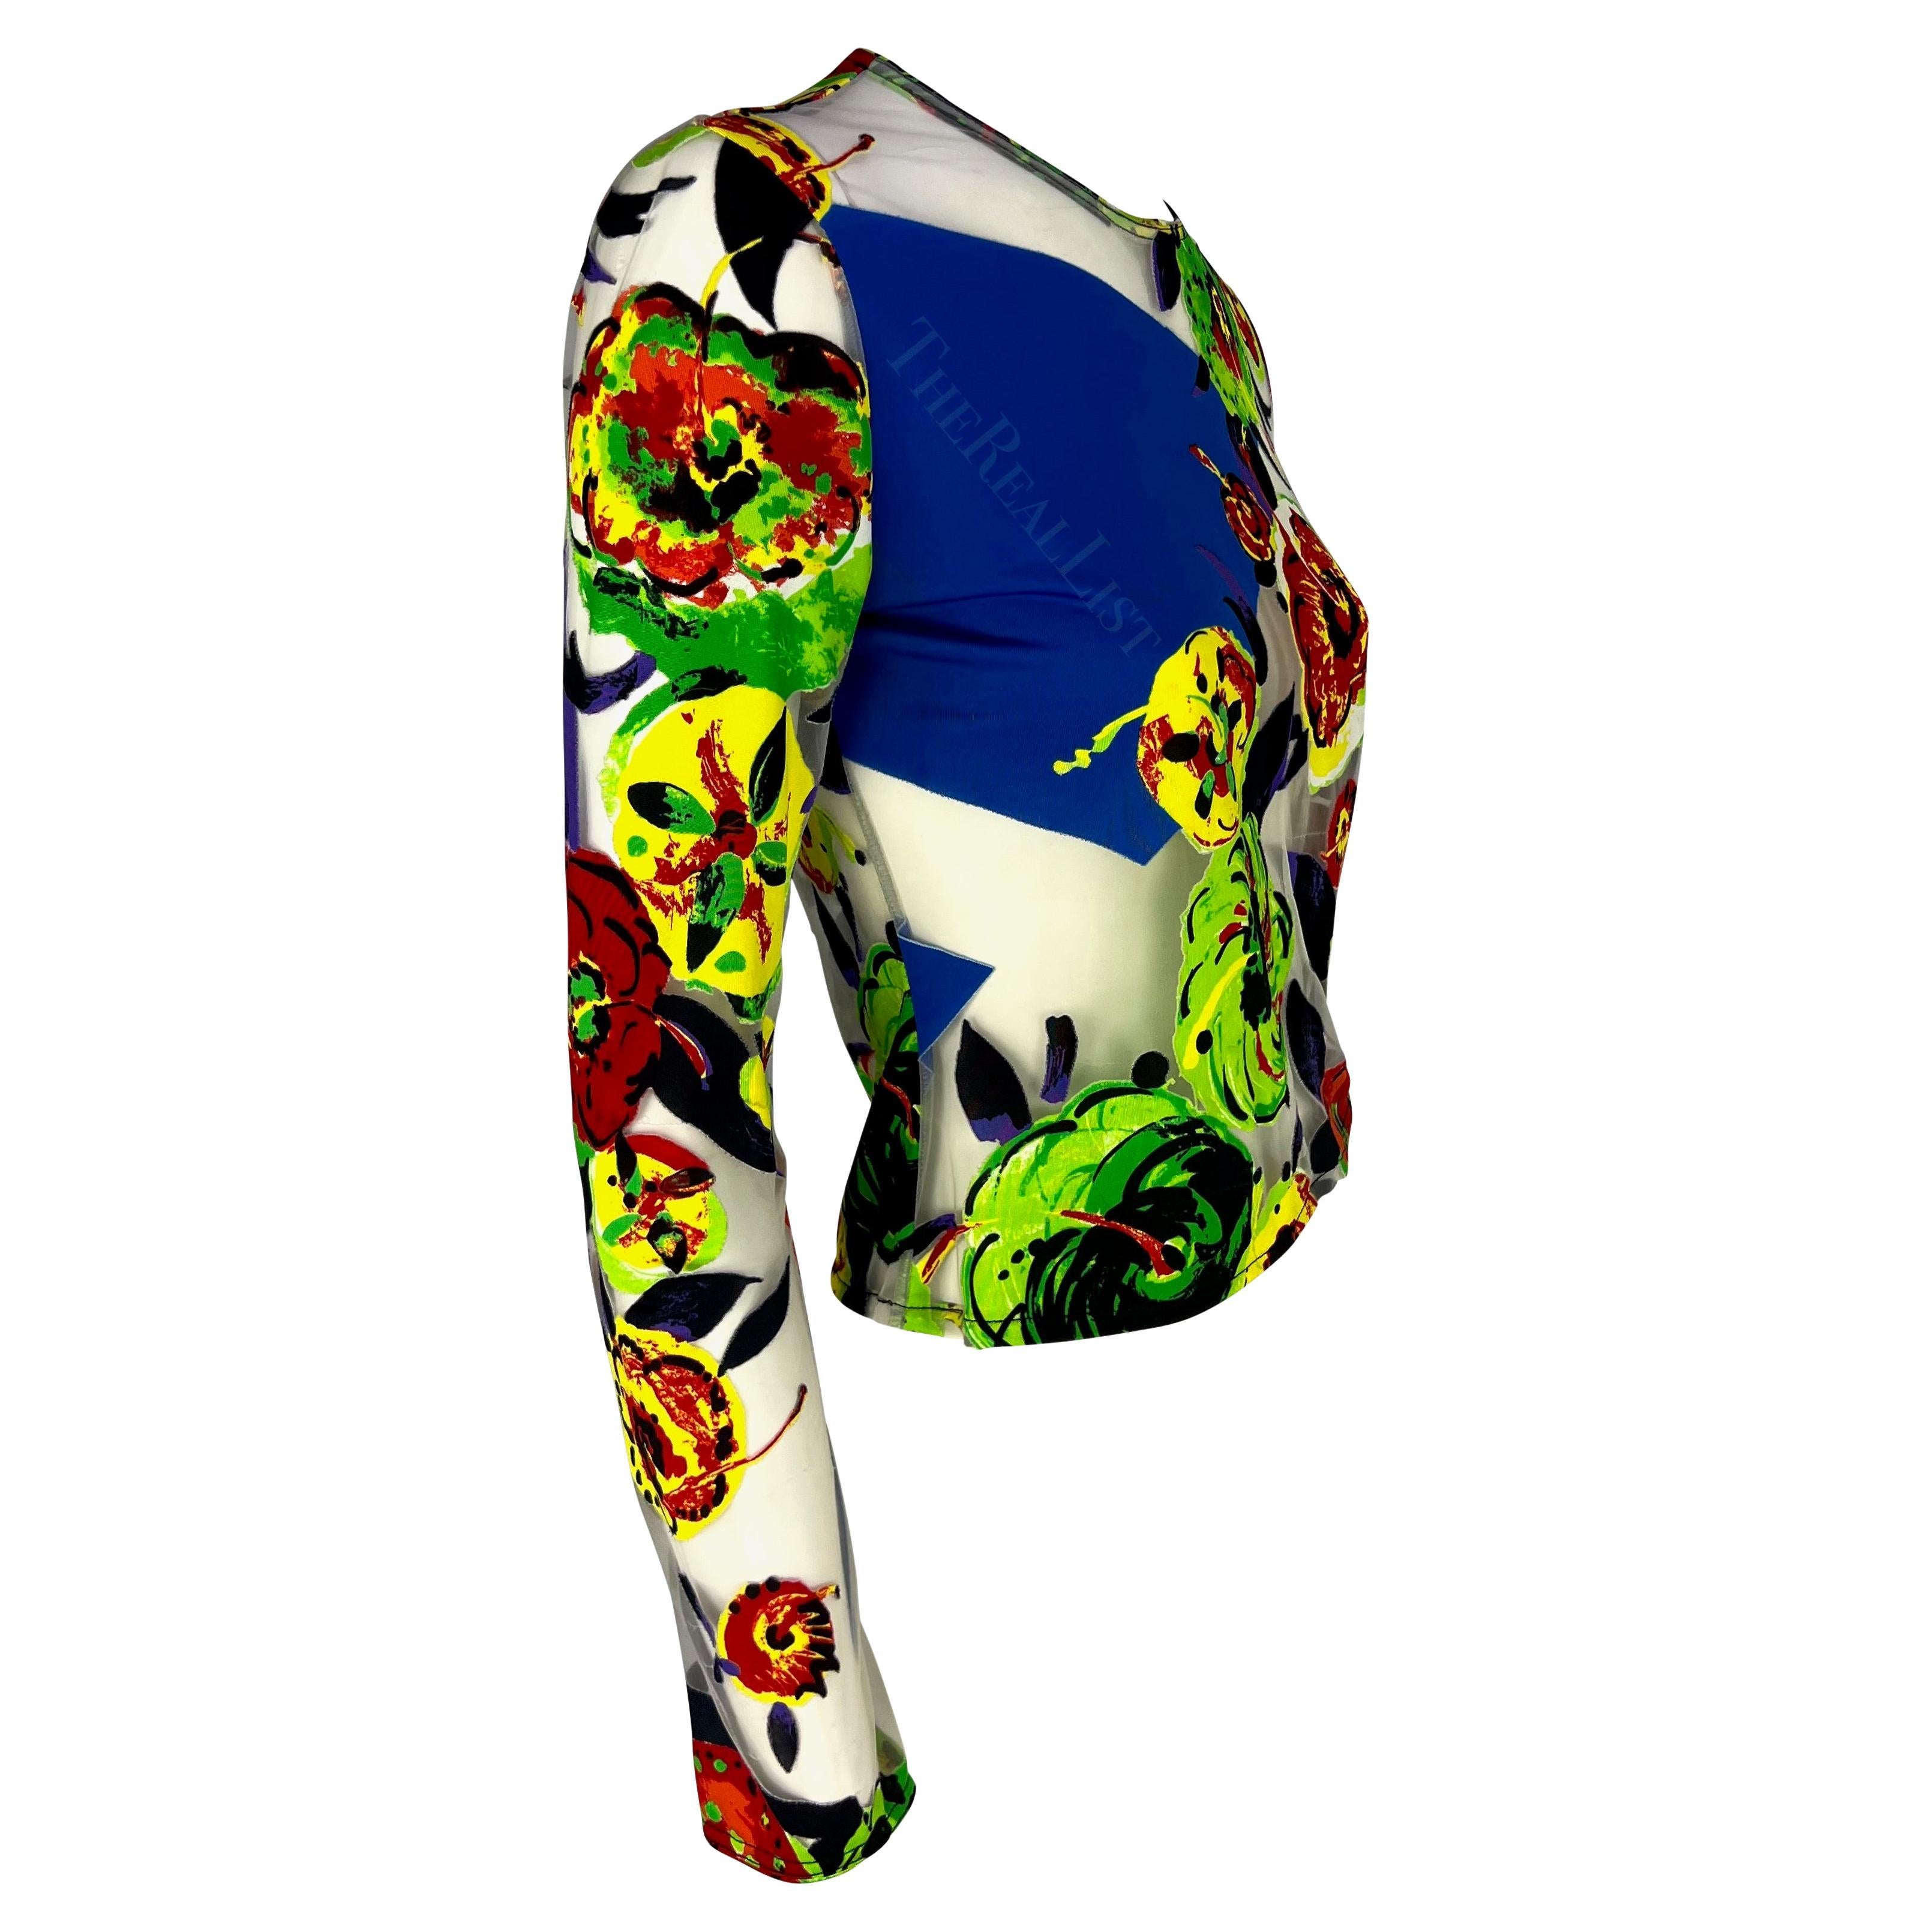 S/S 1997 Gianni Versace Runway Sheer Pop Art Floral Abstract Print Tulle Top For Sale 4